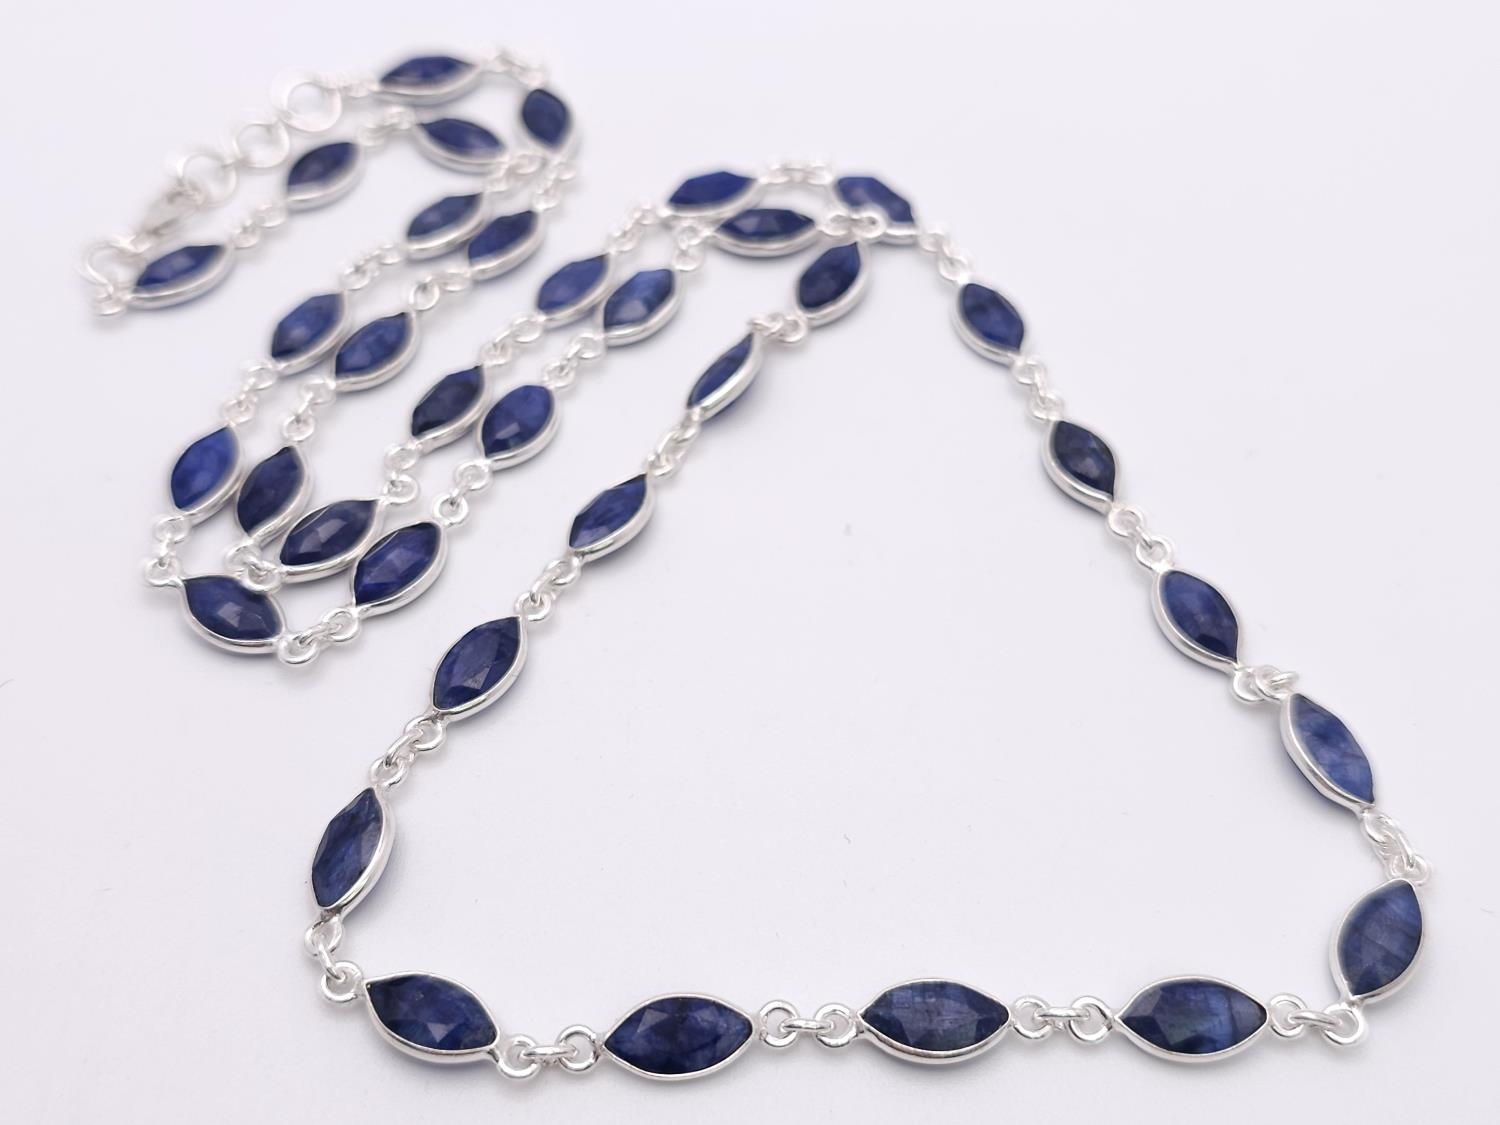 A Marquise Shape Blue Sapphire Long Chain Necklace. Set in 925 Silver. 62cm. Ref: CD-1318 - Image 2 of 5